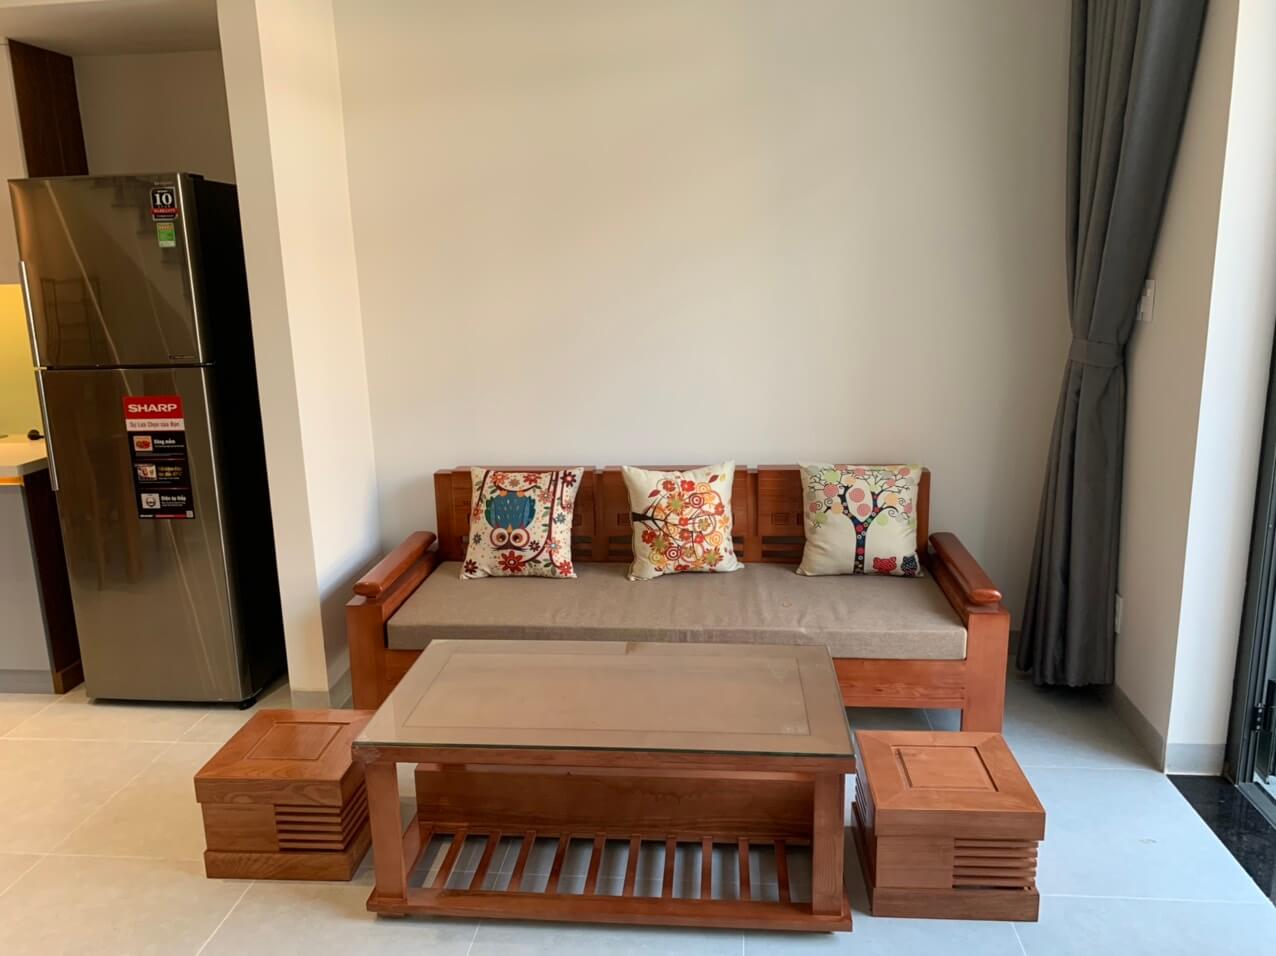 A living room with a couch, coffee table and refrigerator in Danang.